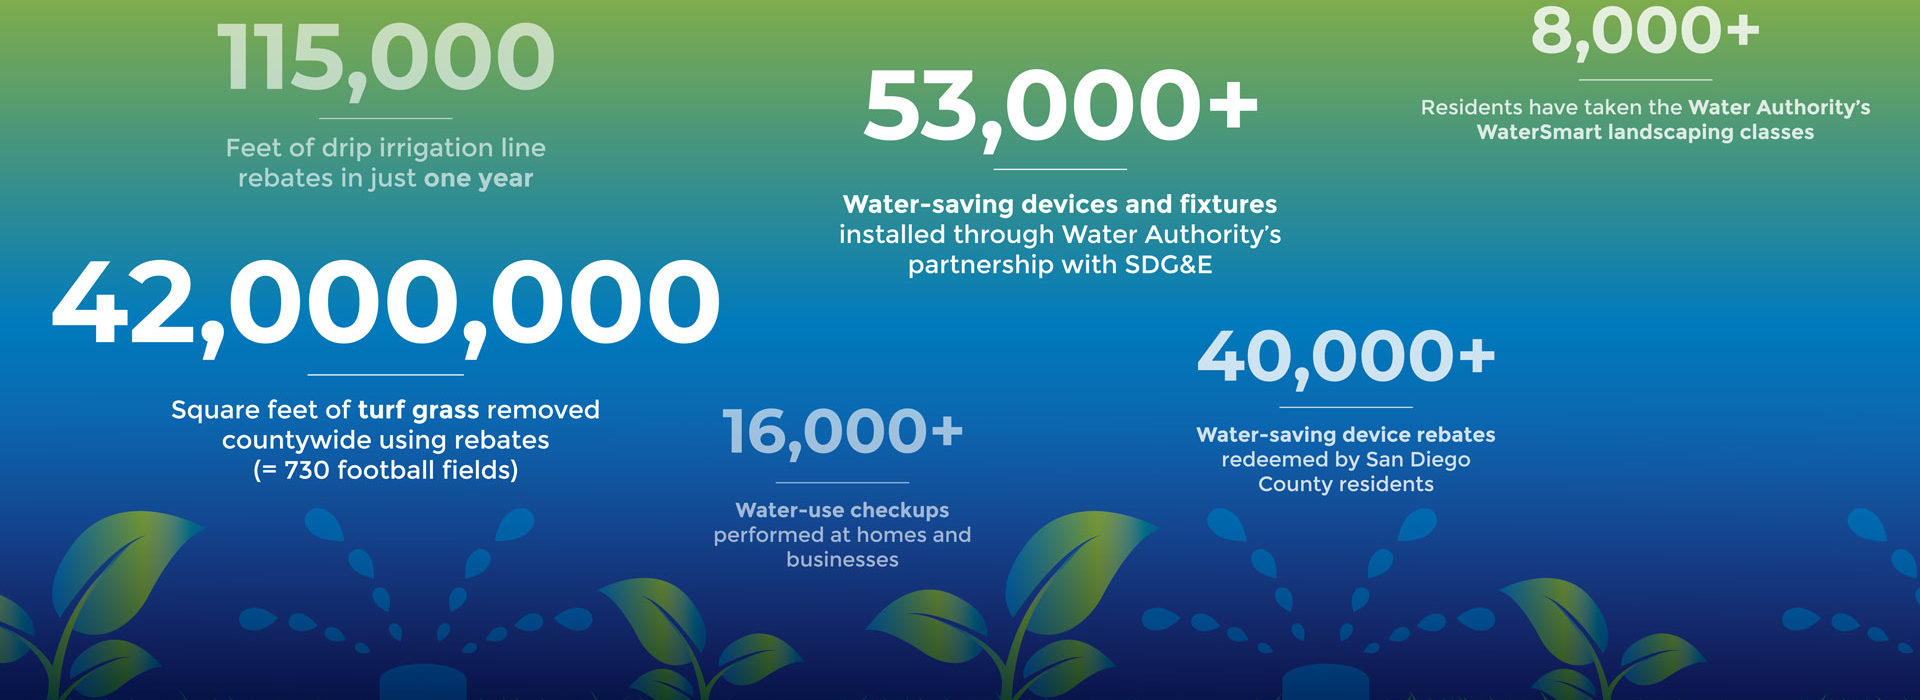 Water-Use infographic